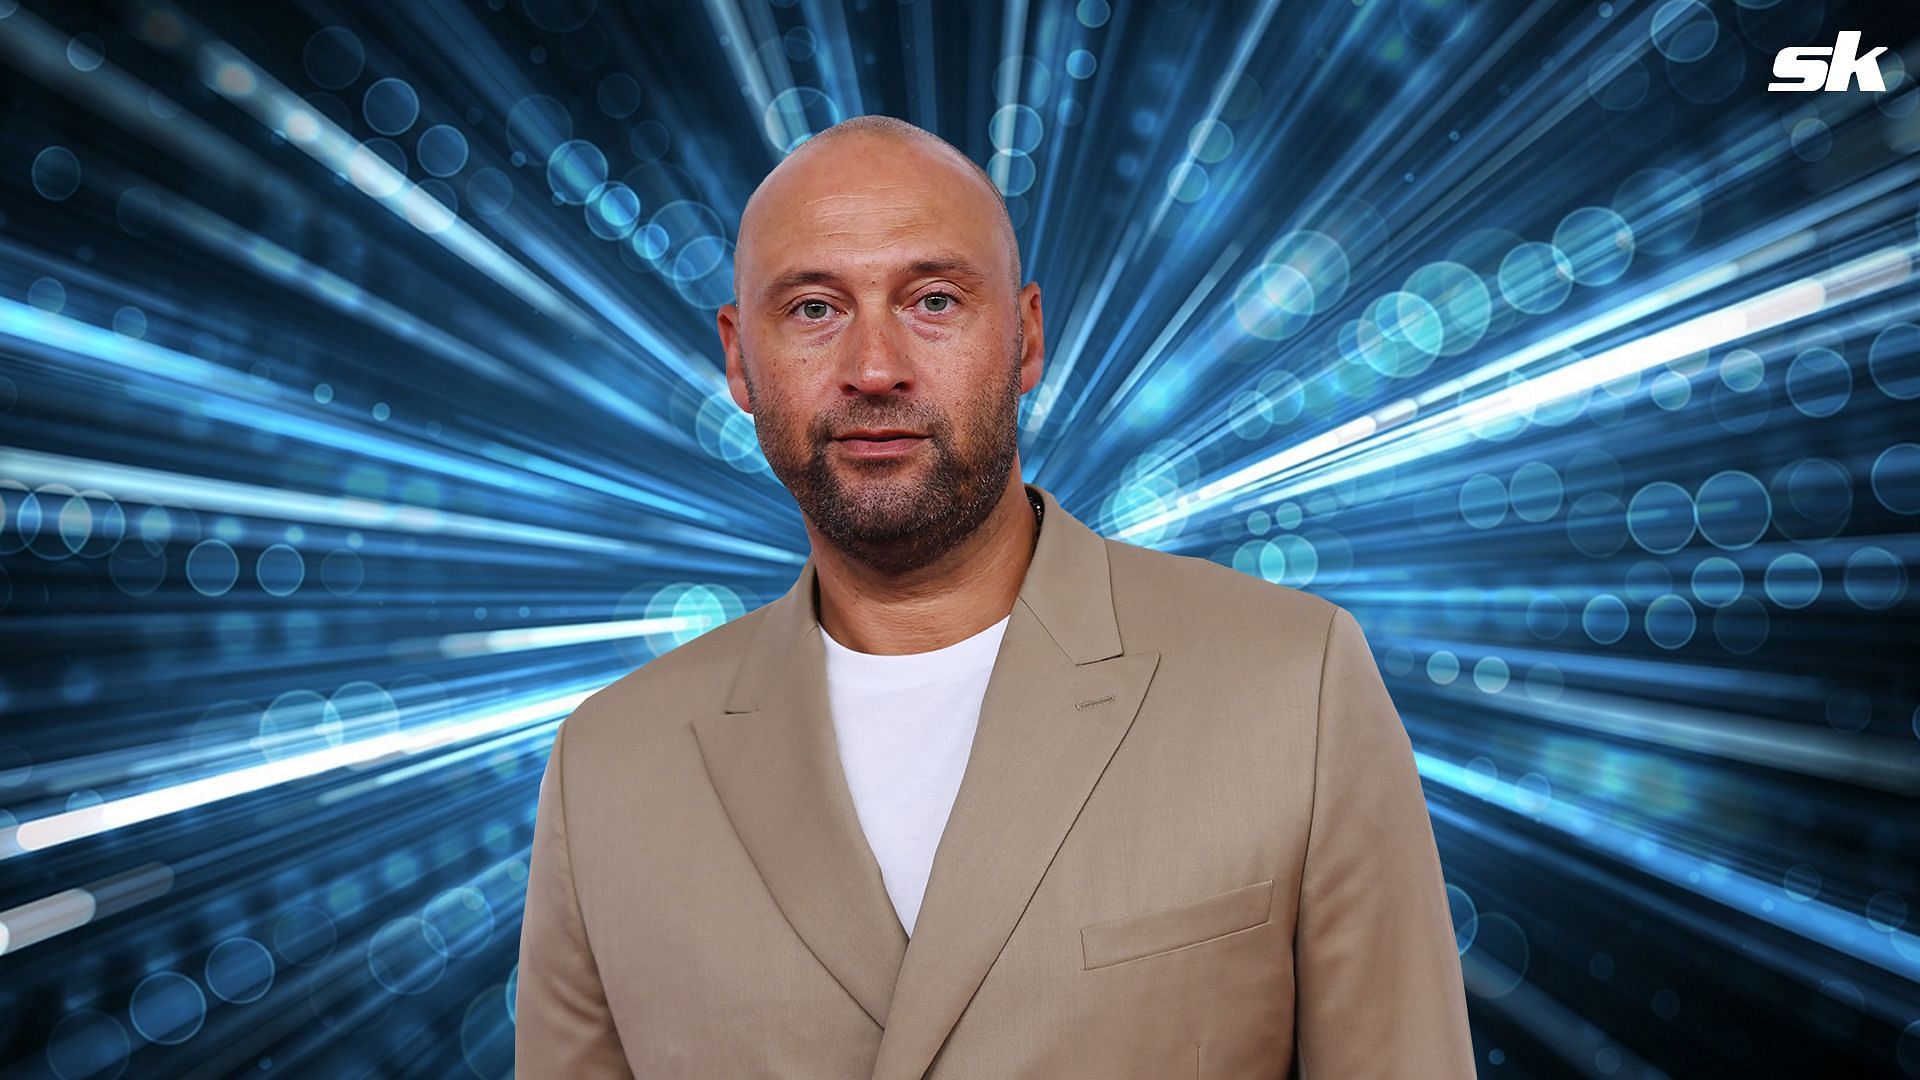 Derek Jeter credited his parents for being a big reason why he stayed true to his MLB dreams